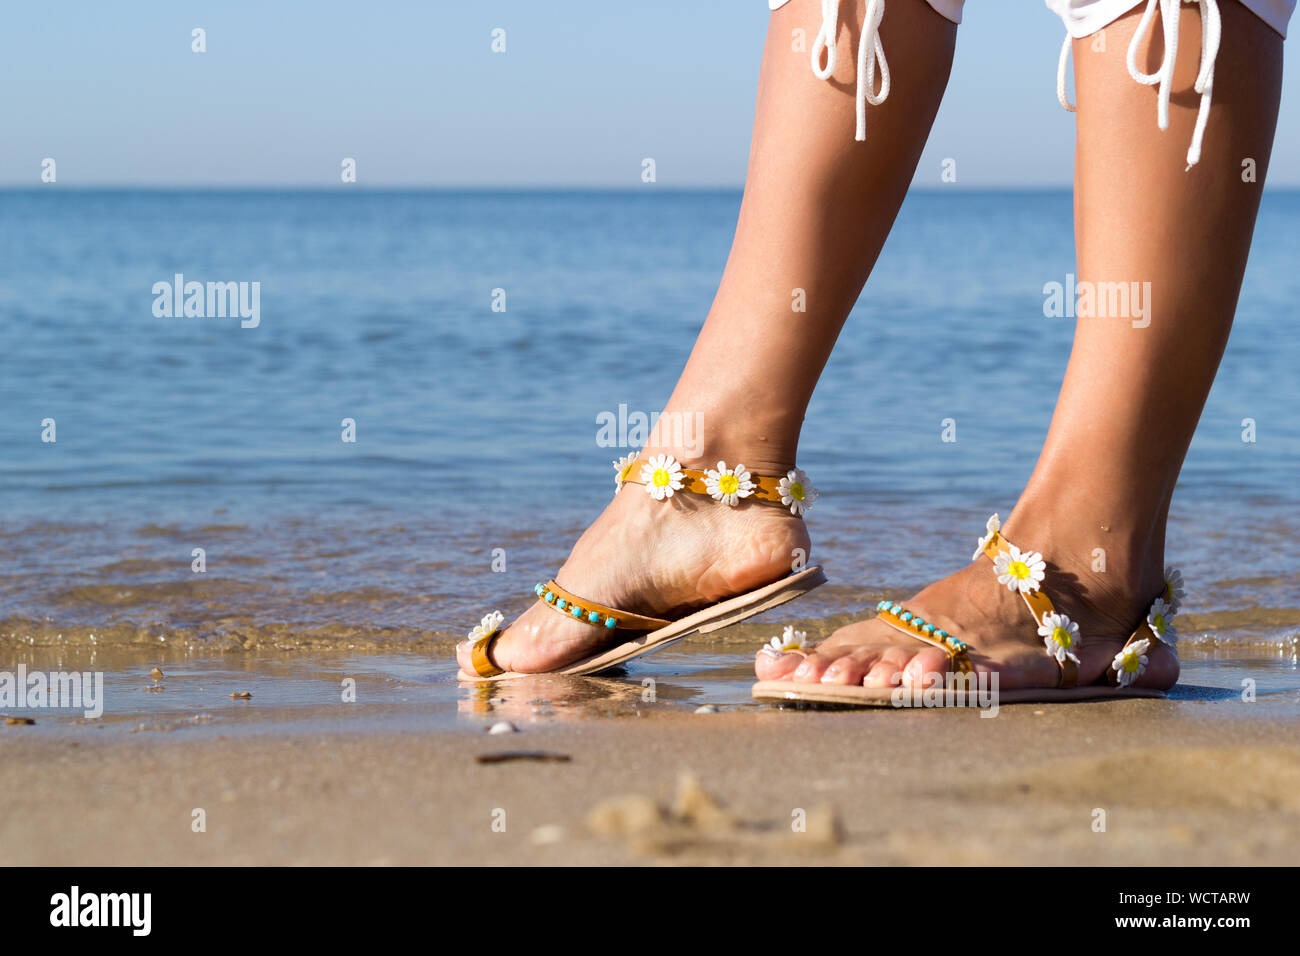 Holidays at sea. Female feet on golden sand on seashore. Woman legs dressed in white shorts and sandals with flowers. Summer relaxation on seacoast. L Stock Photo